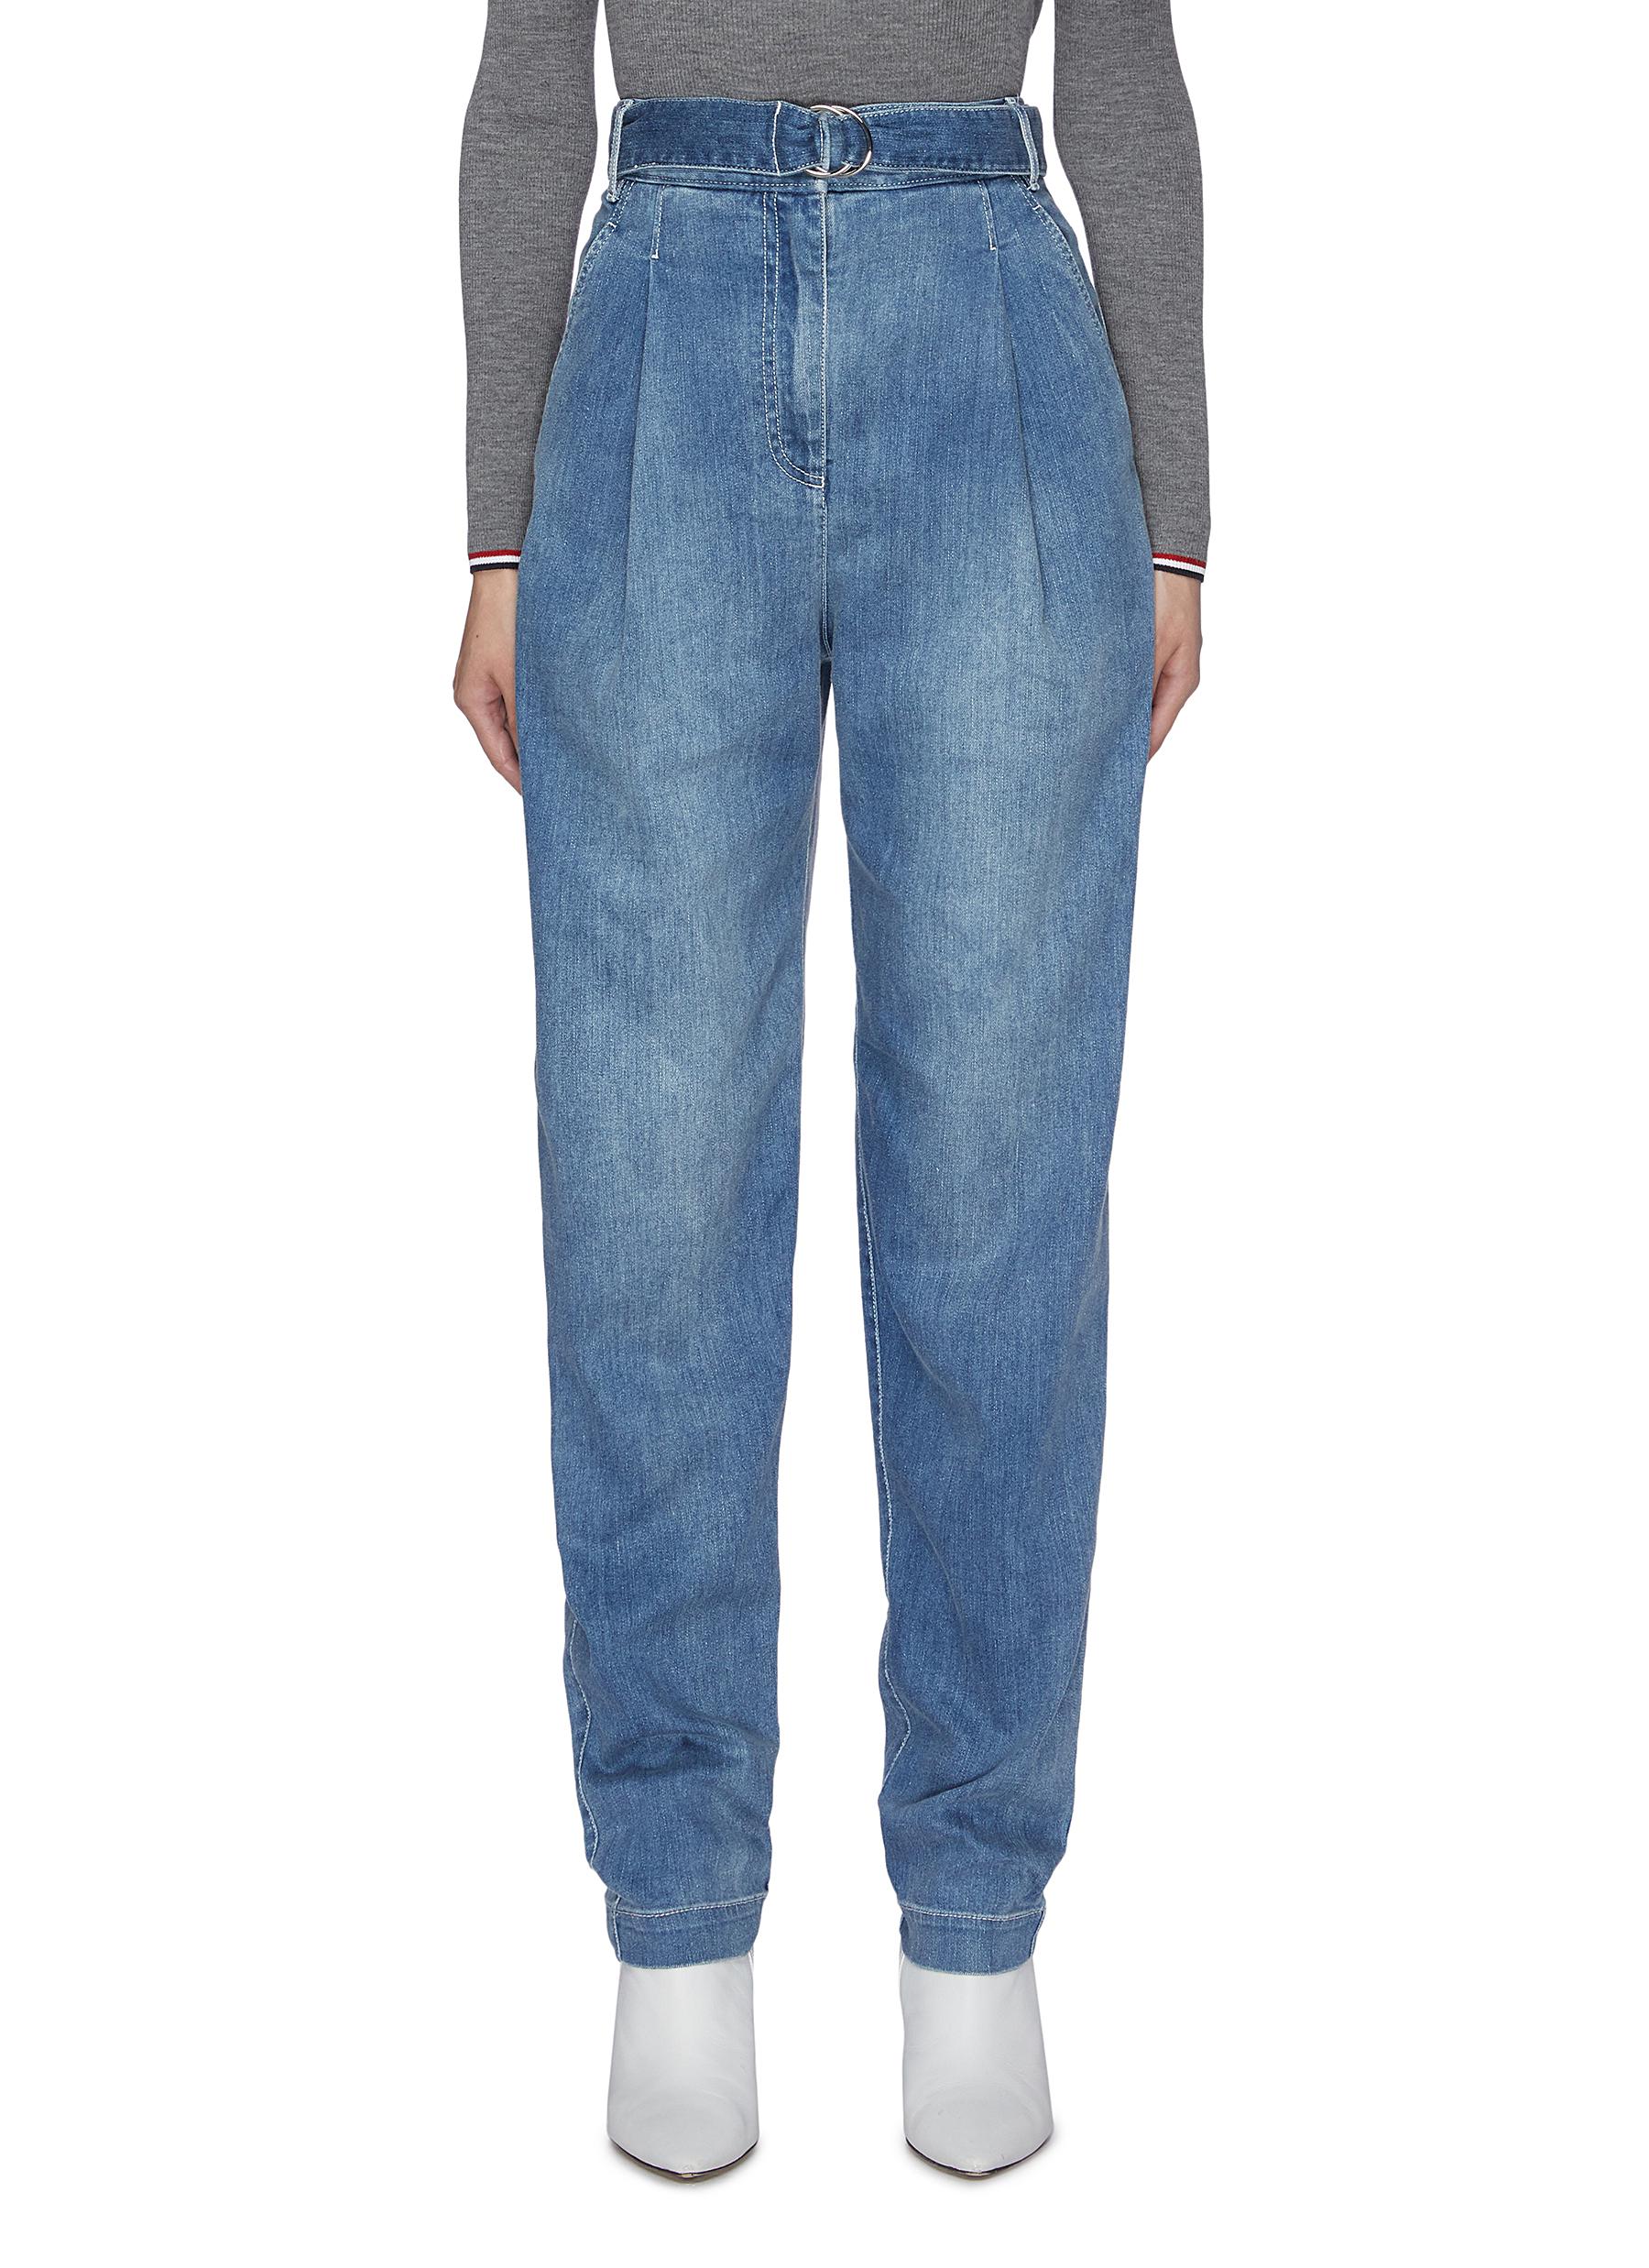 Belted pleated stonewashed jeans by Tibi